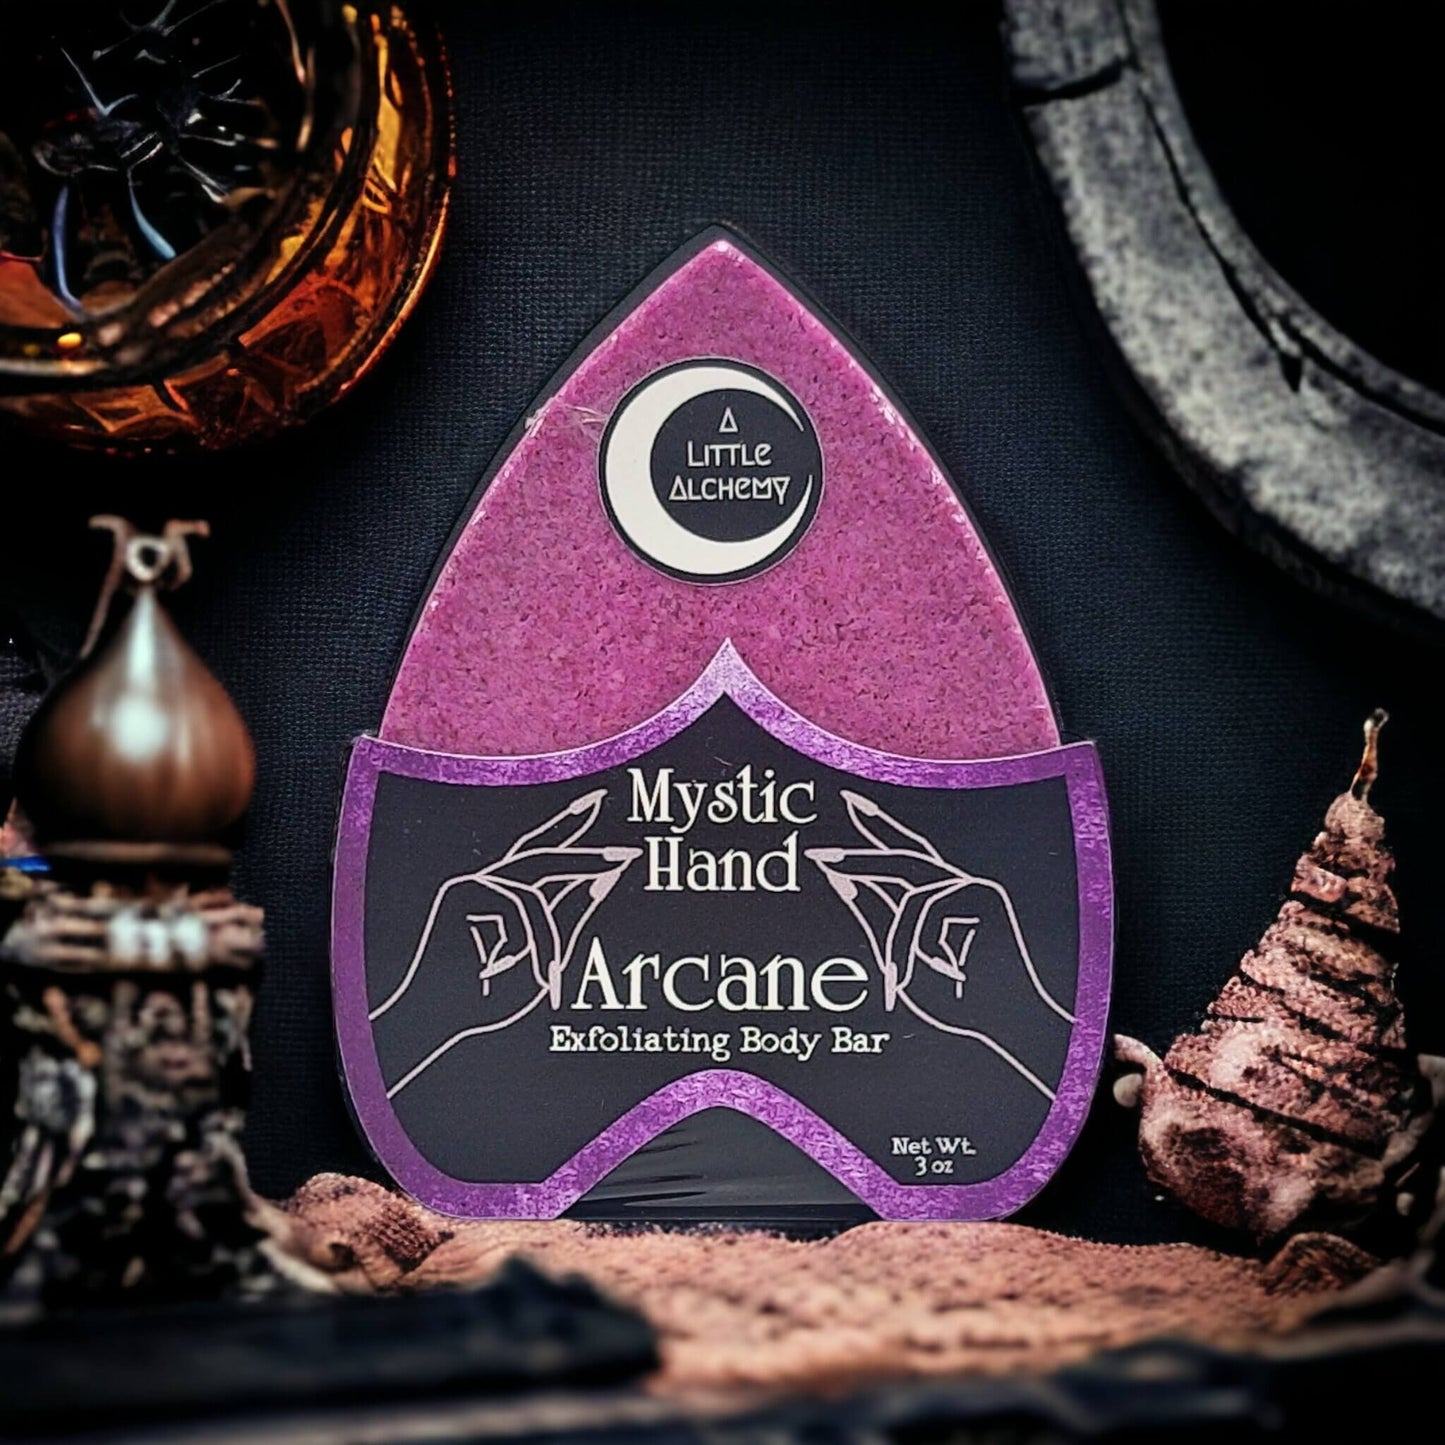 Picture of our mystic hand exfoliating body bar in the scent Arcane.